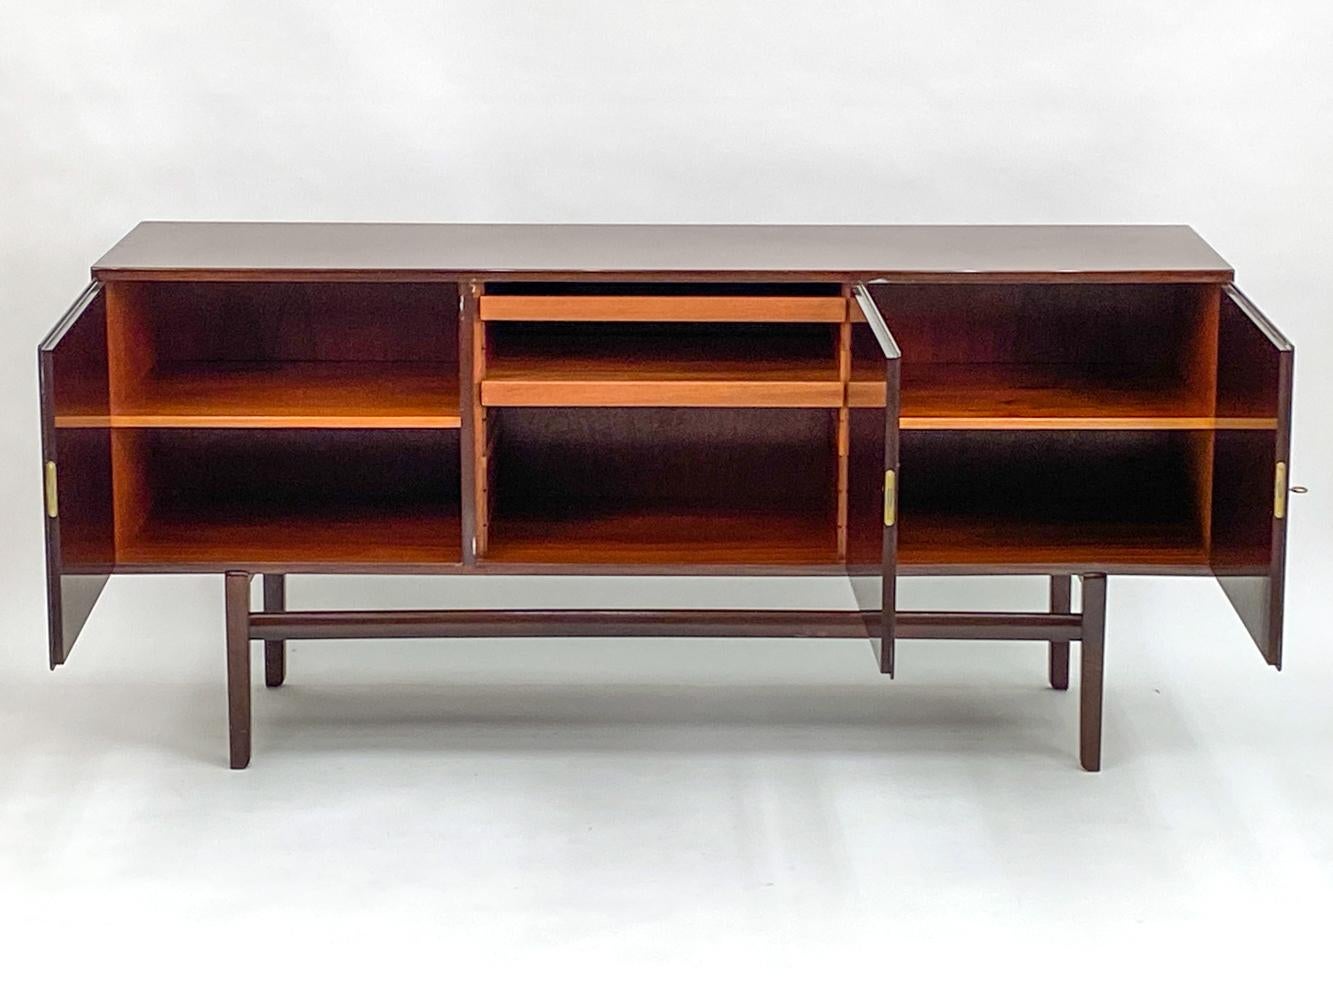 Mid-20th Century Ole Wanscher for Poul Jeppesen Rungstedlund Series Sideboard in Mahogany For Sale